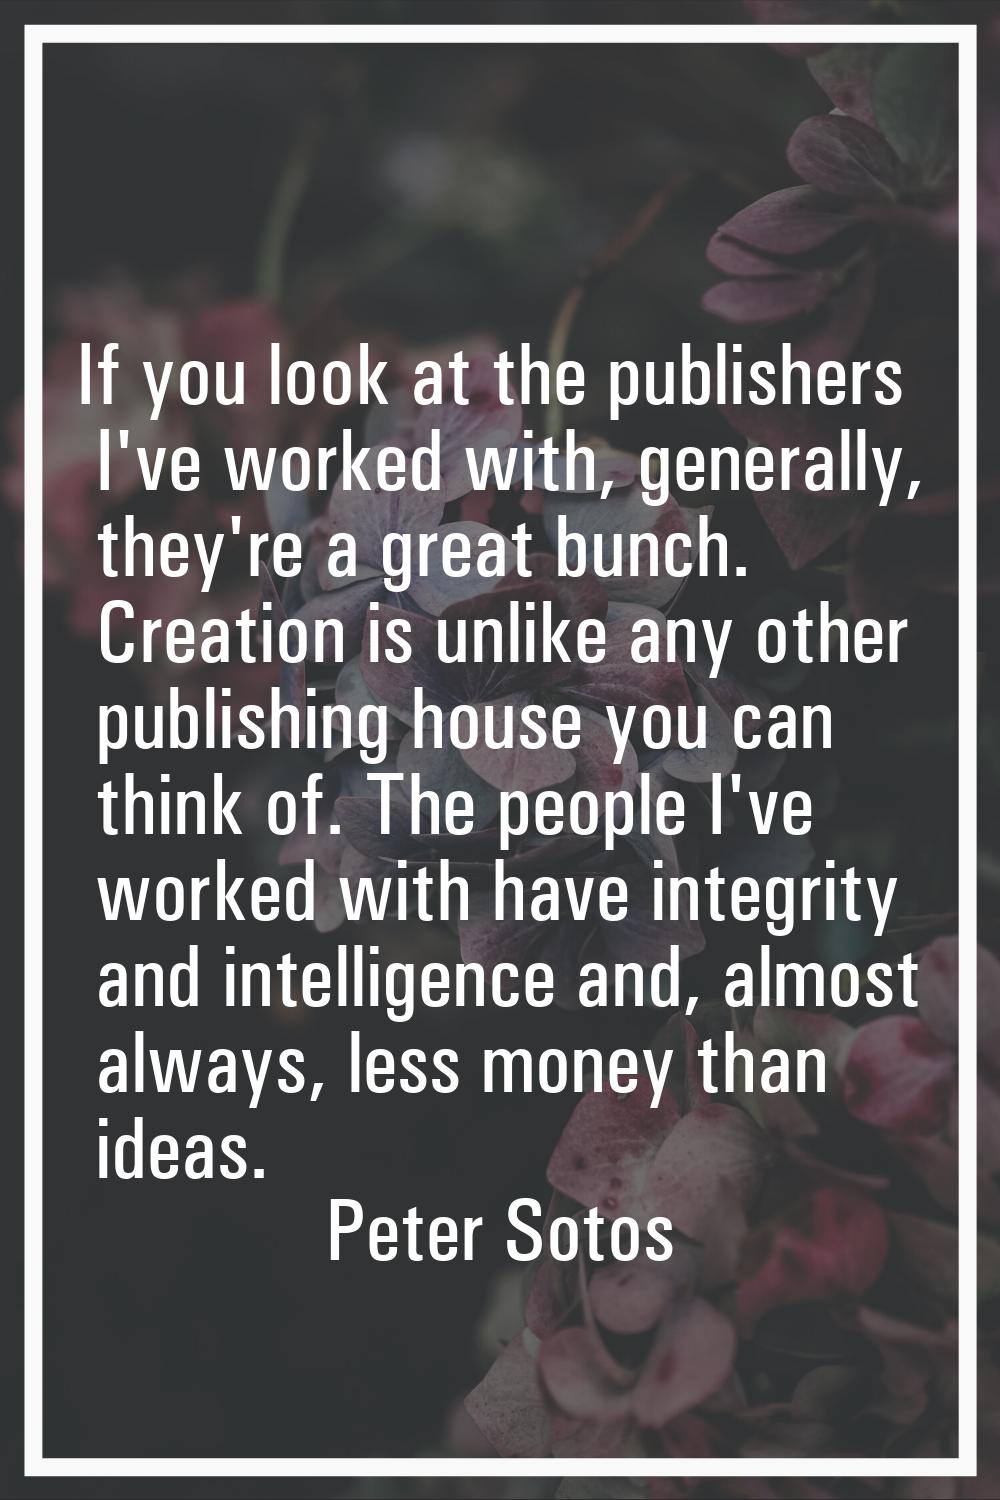 If you look at the publishers I've worked with, generally, they're a great bunch. Creation is unlik